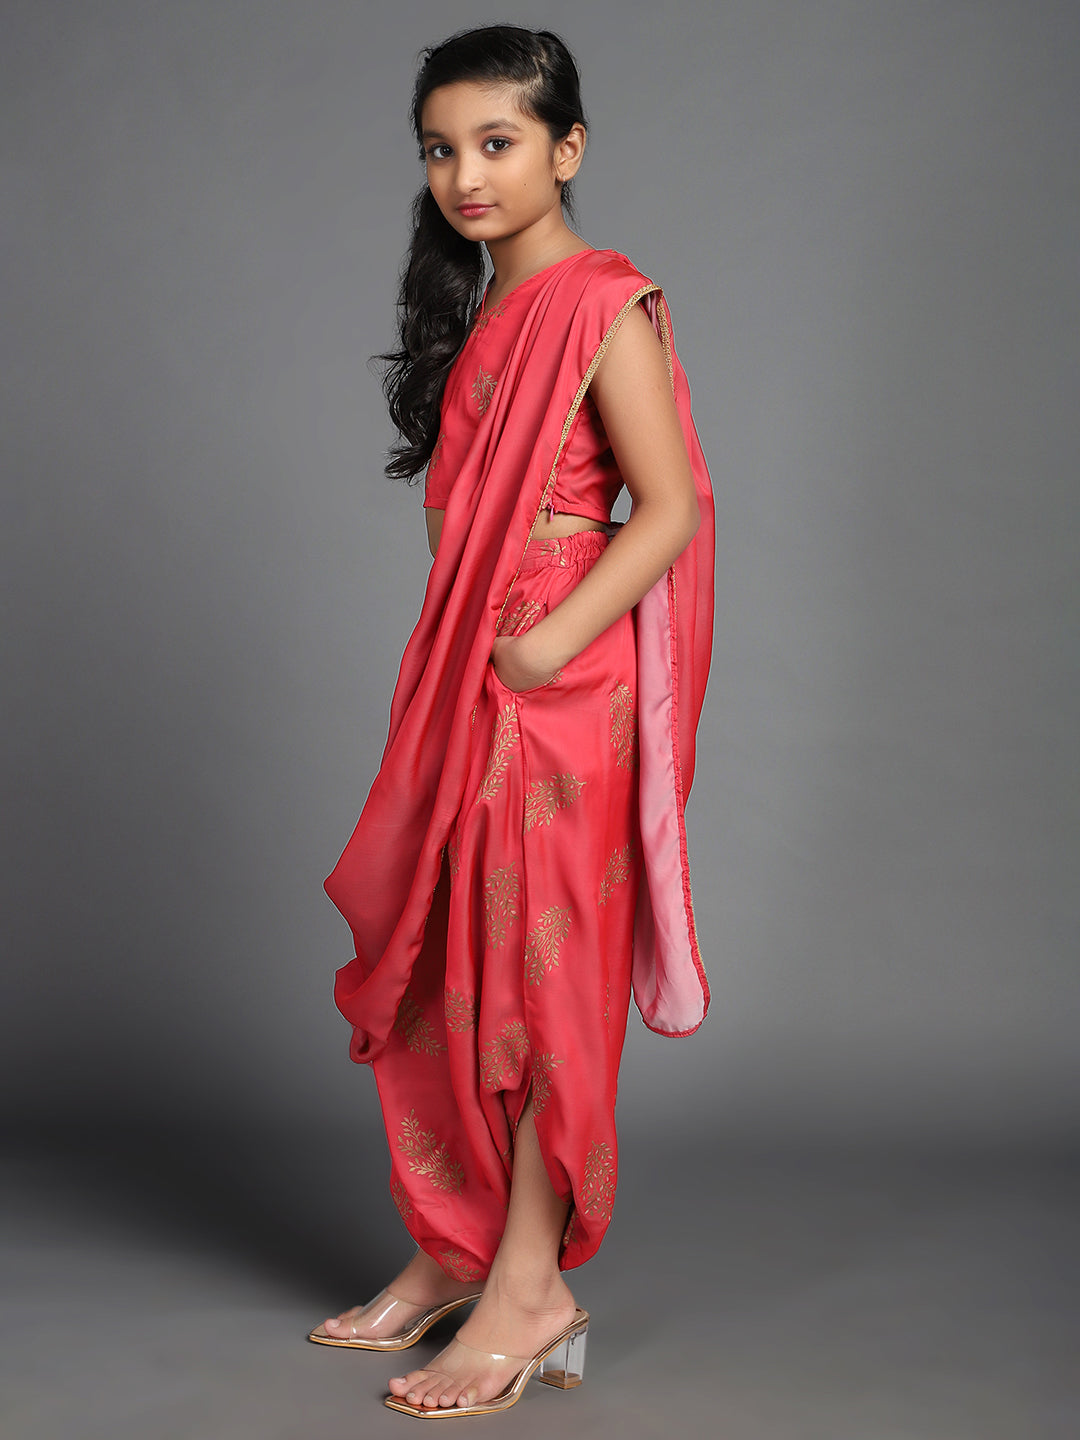 Red Foil Printed Dhoti Saree With Blouse